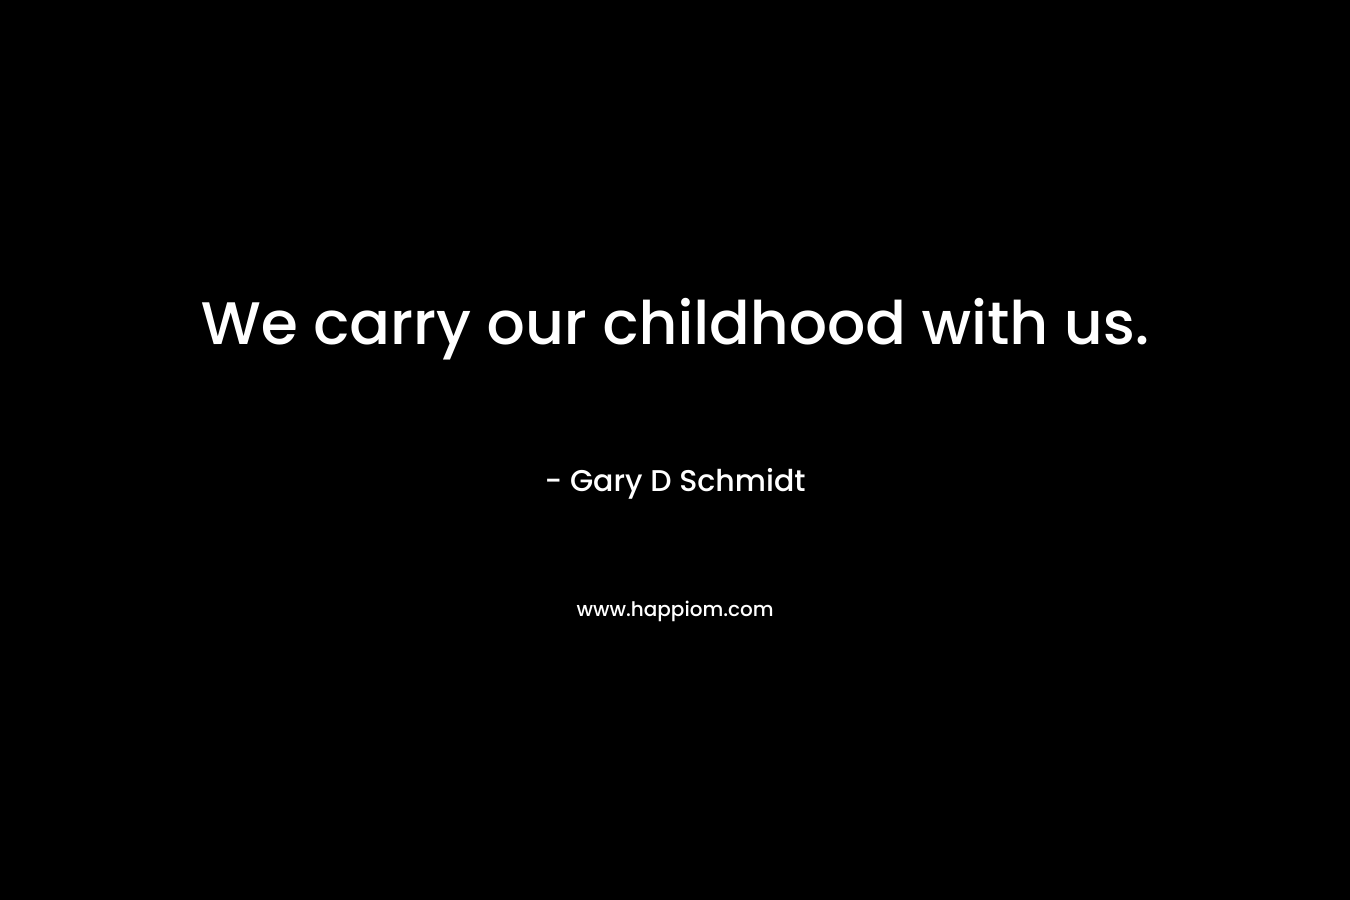 We carry our childhood with us. – Gary D Schmidt